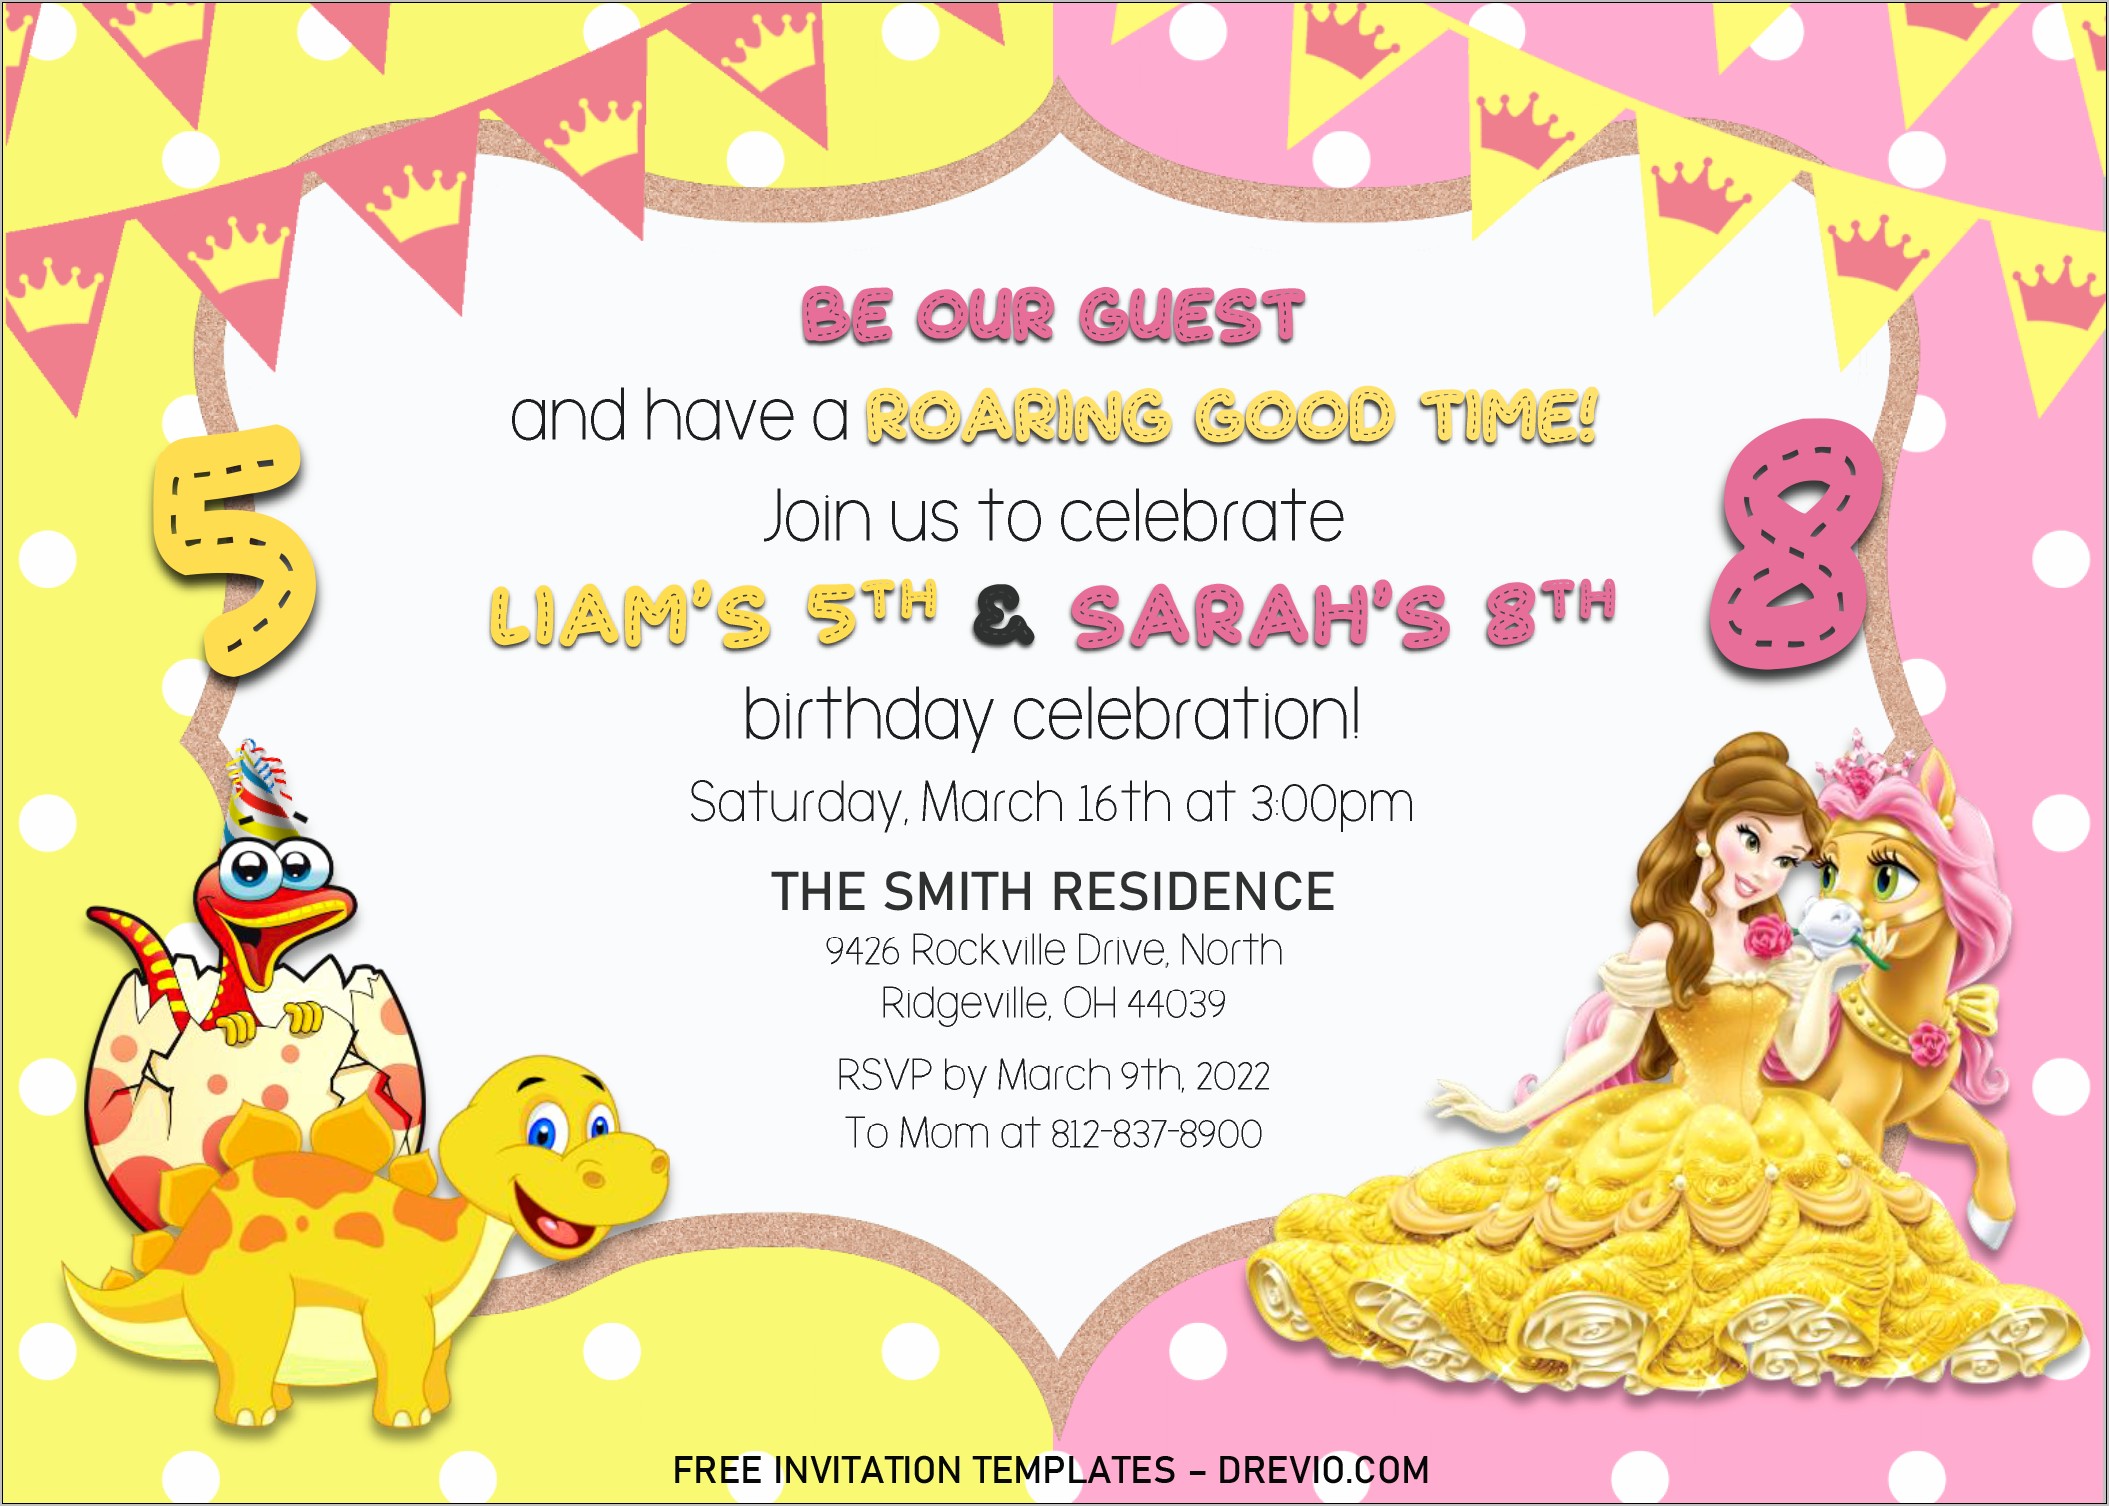 Be Our Guest Invitation Template Free